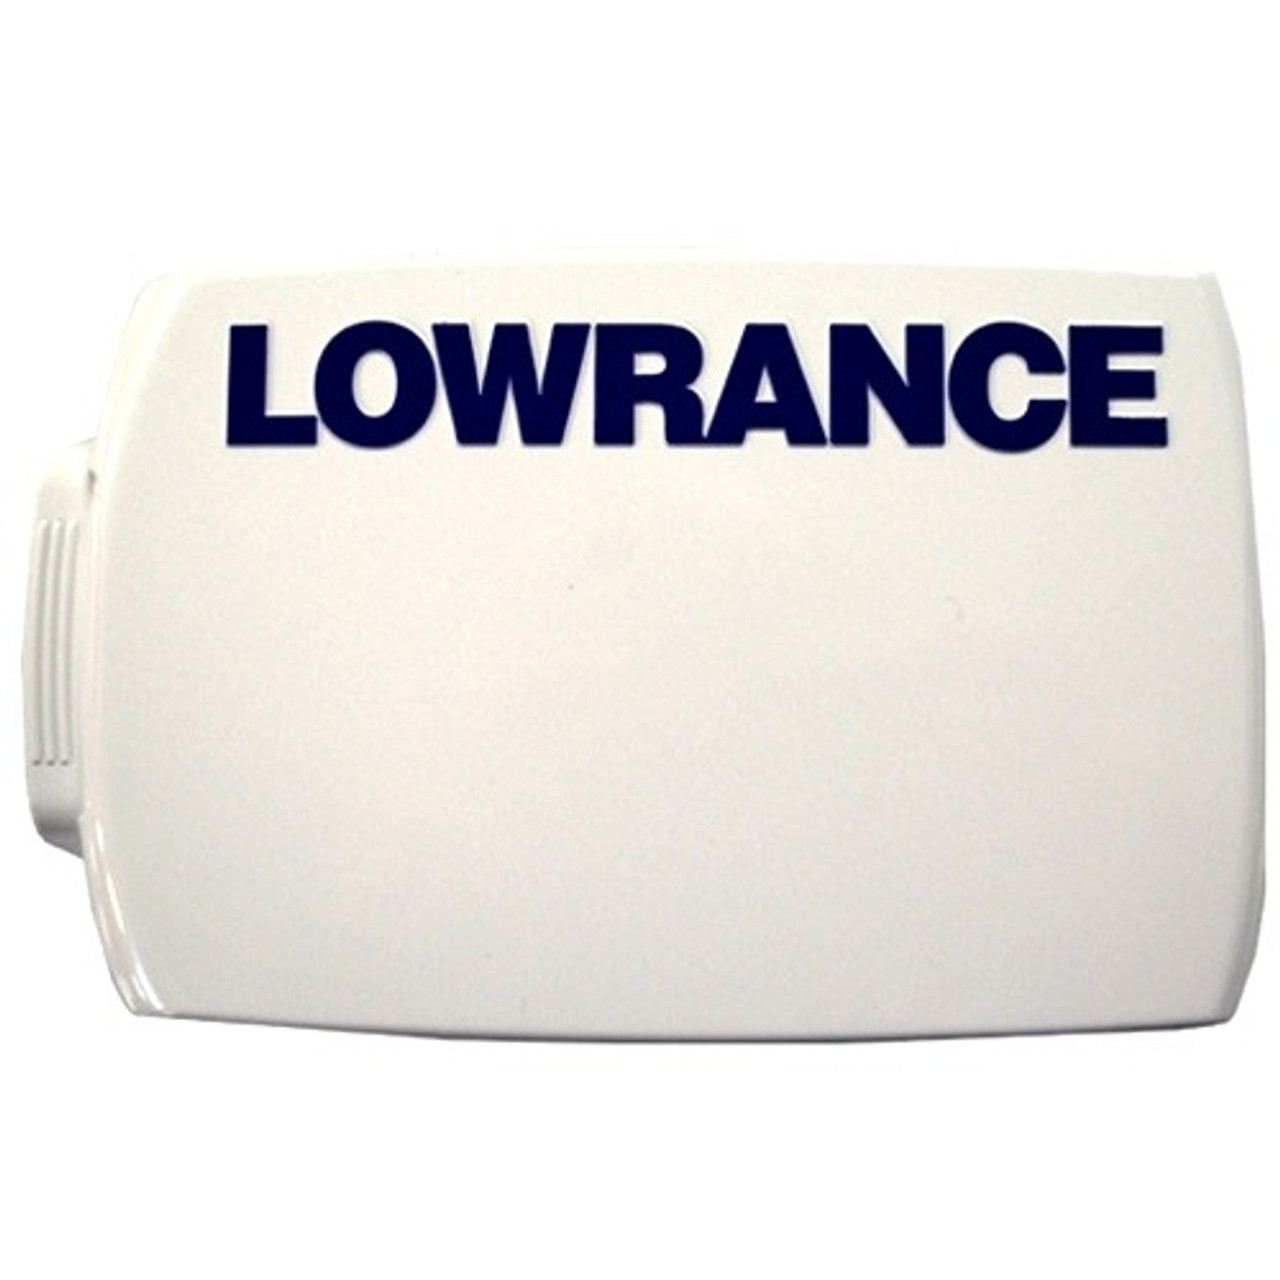 Lowrance Dust Cover - Supports Fishfinder (000-11307-001)